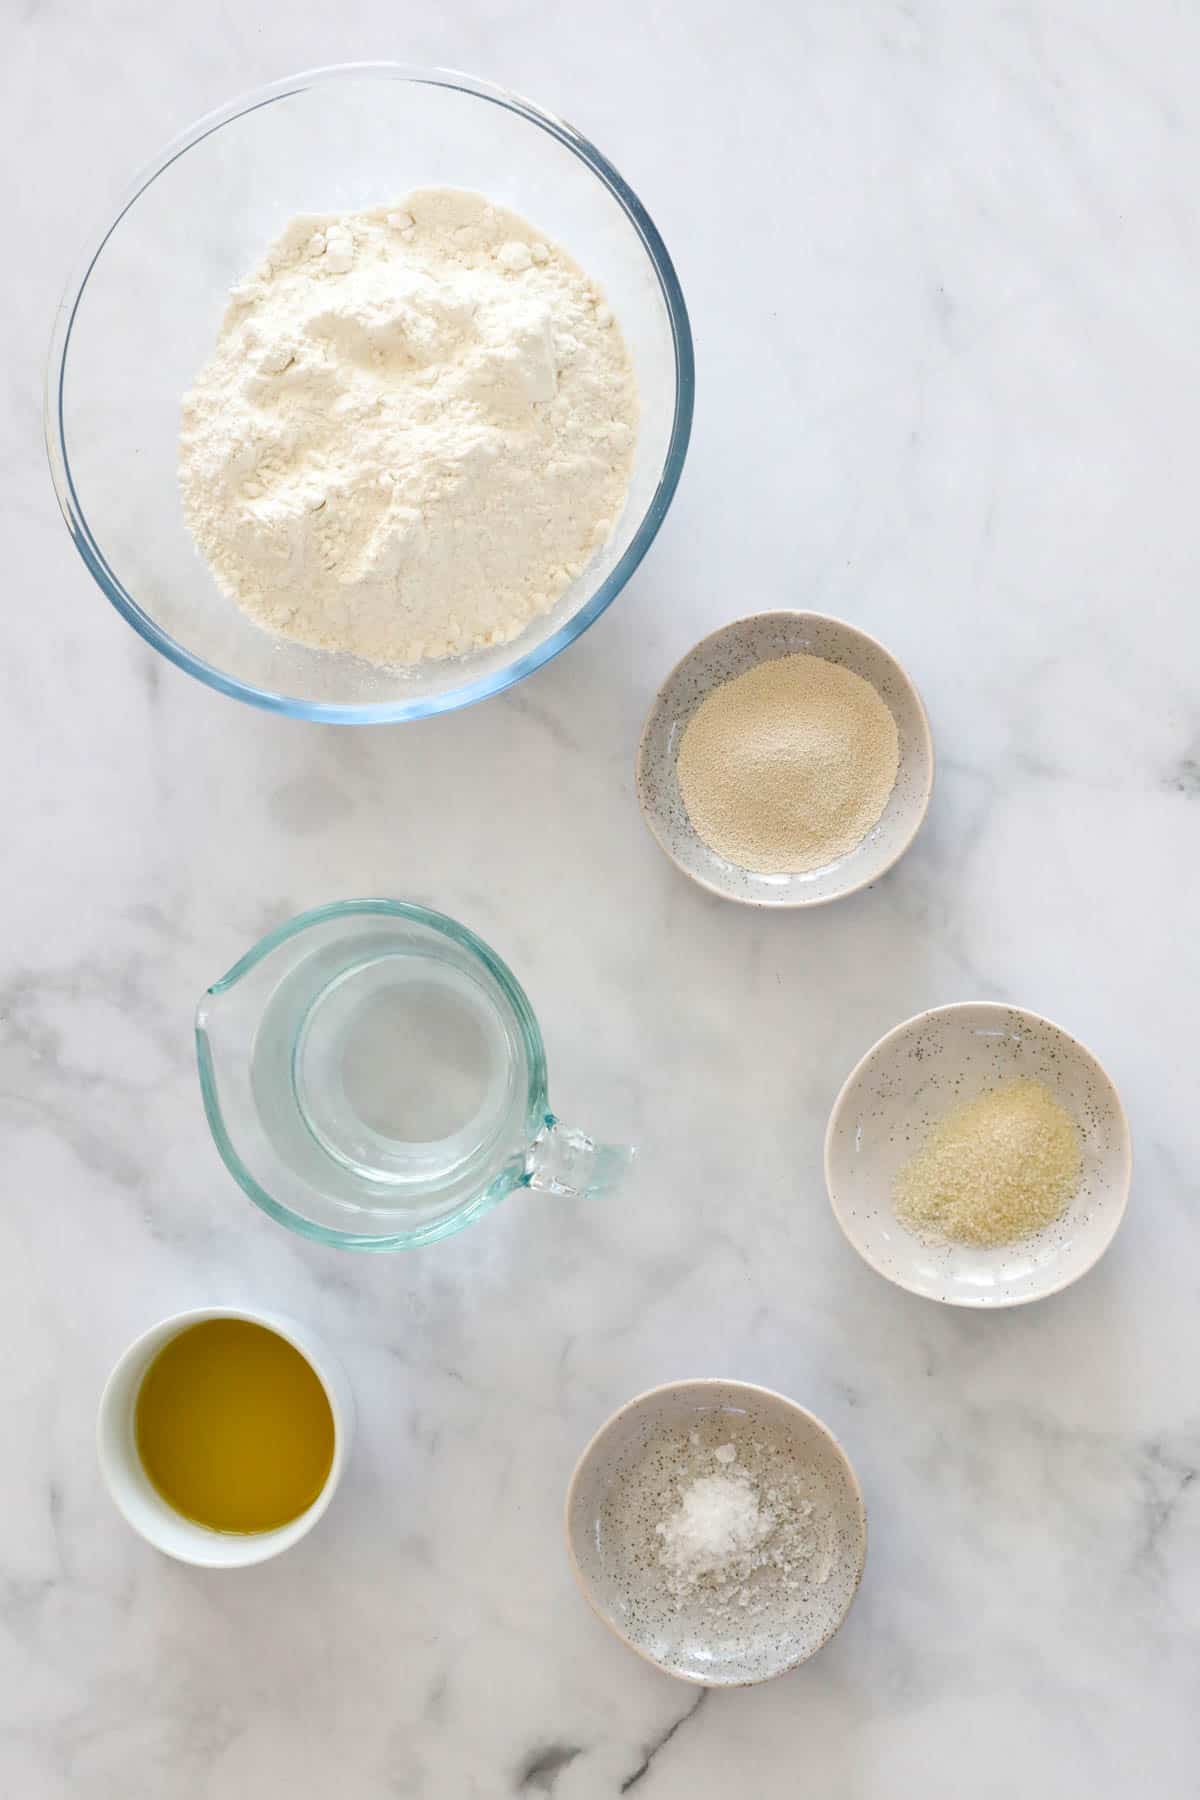 The six ingredients for homemade pizza dough.